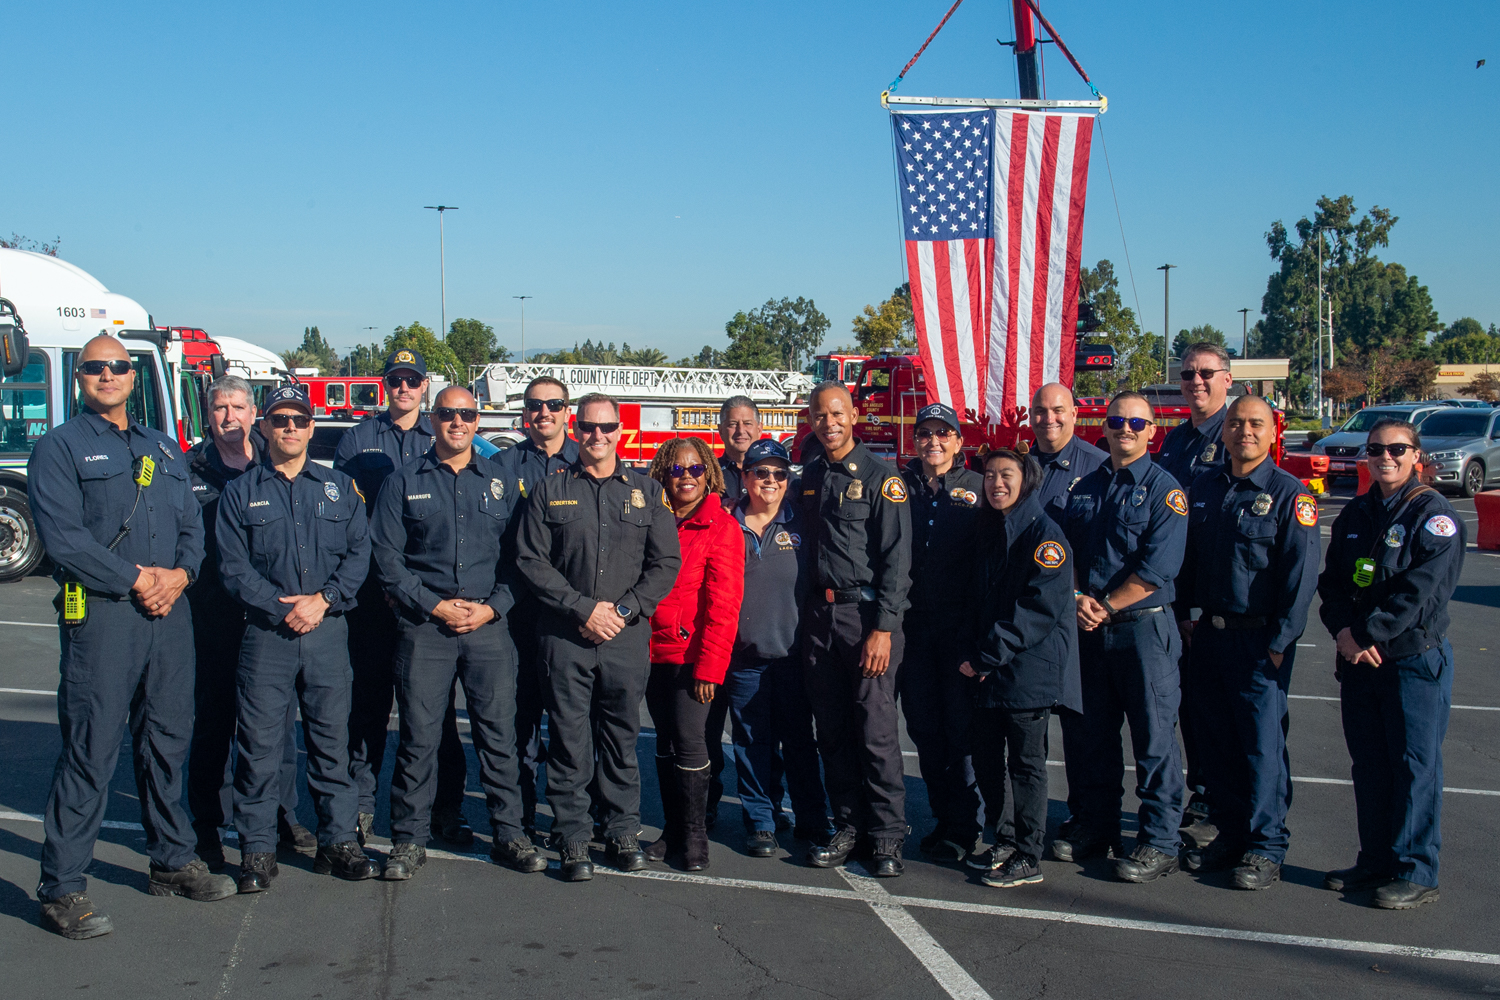 Beginning on November 14, 2022, the Los Angeles County Fire Department (LACoFD) partnered with ABC7’s Spark of Love toy drive to collect and distribute new, unwrapped toys and sports equipment to children of all ages.